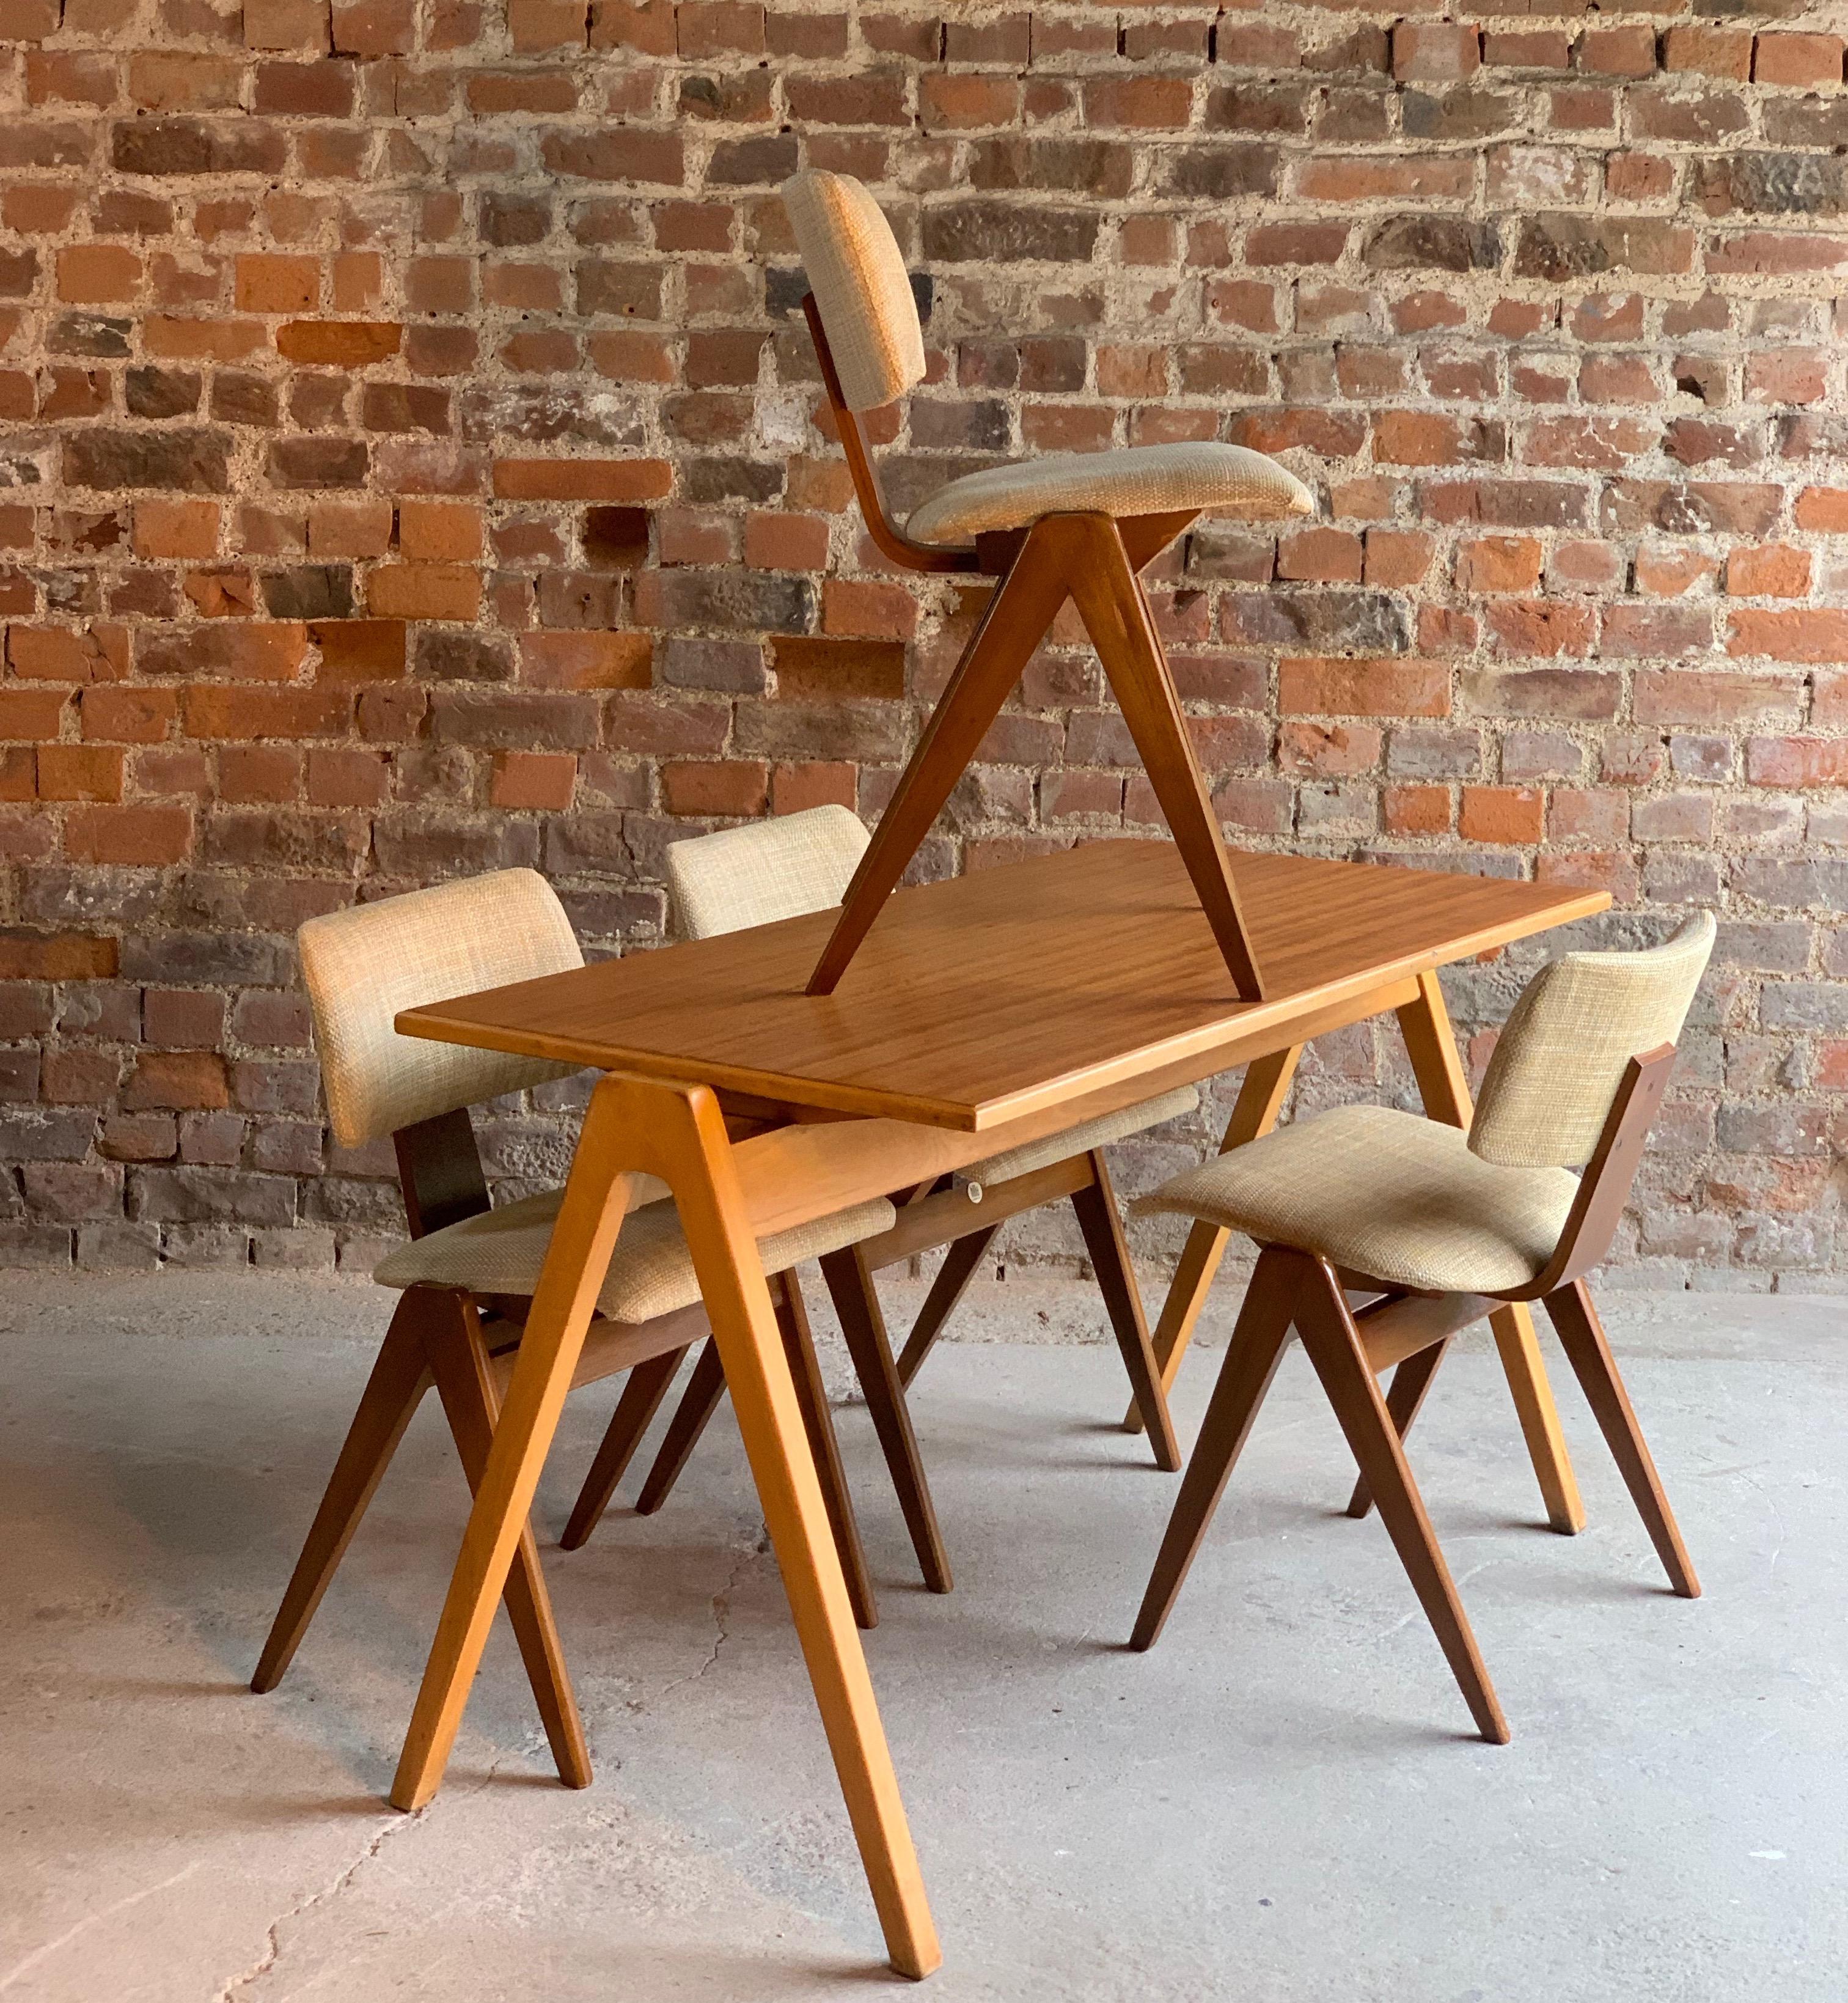 Robin Day Hillestak dining table and vhairs by Hille midcentury Design, circa 1950

Hillestak dining set by Robin Day for Hille, dining table and four dining chairs, circa 1950, with beech frames and plywood faced backs and seats.

Proposed as